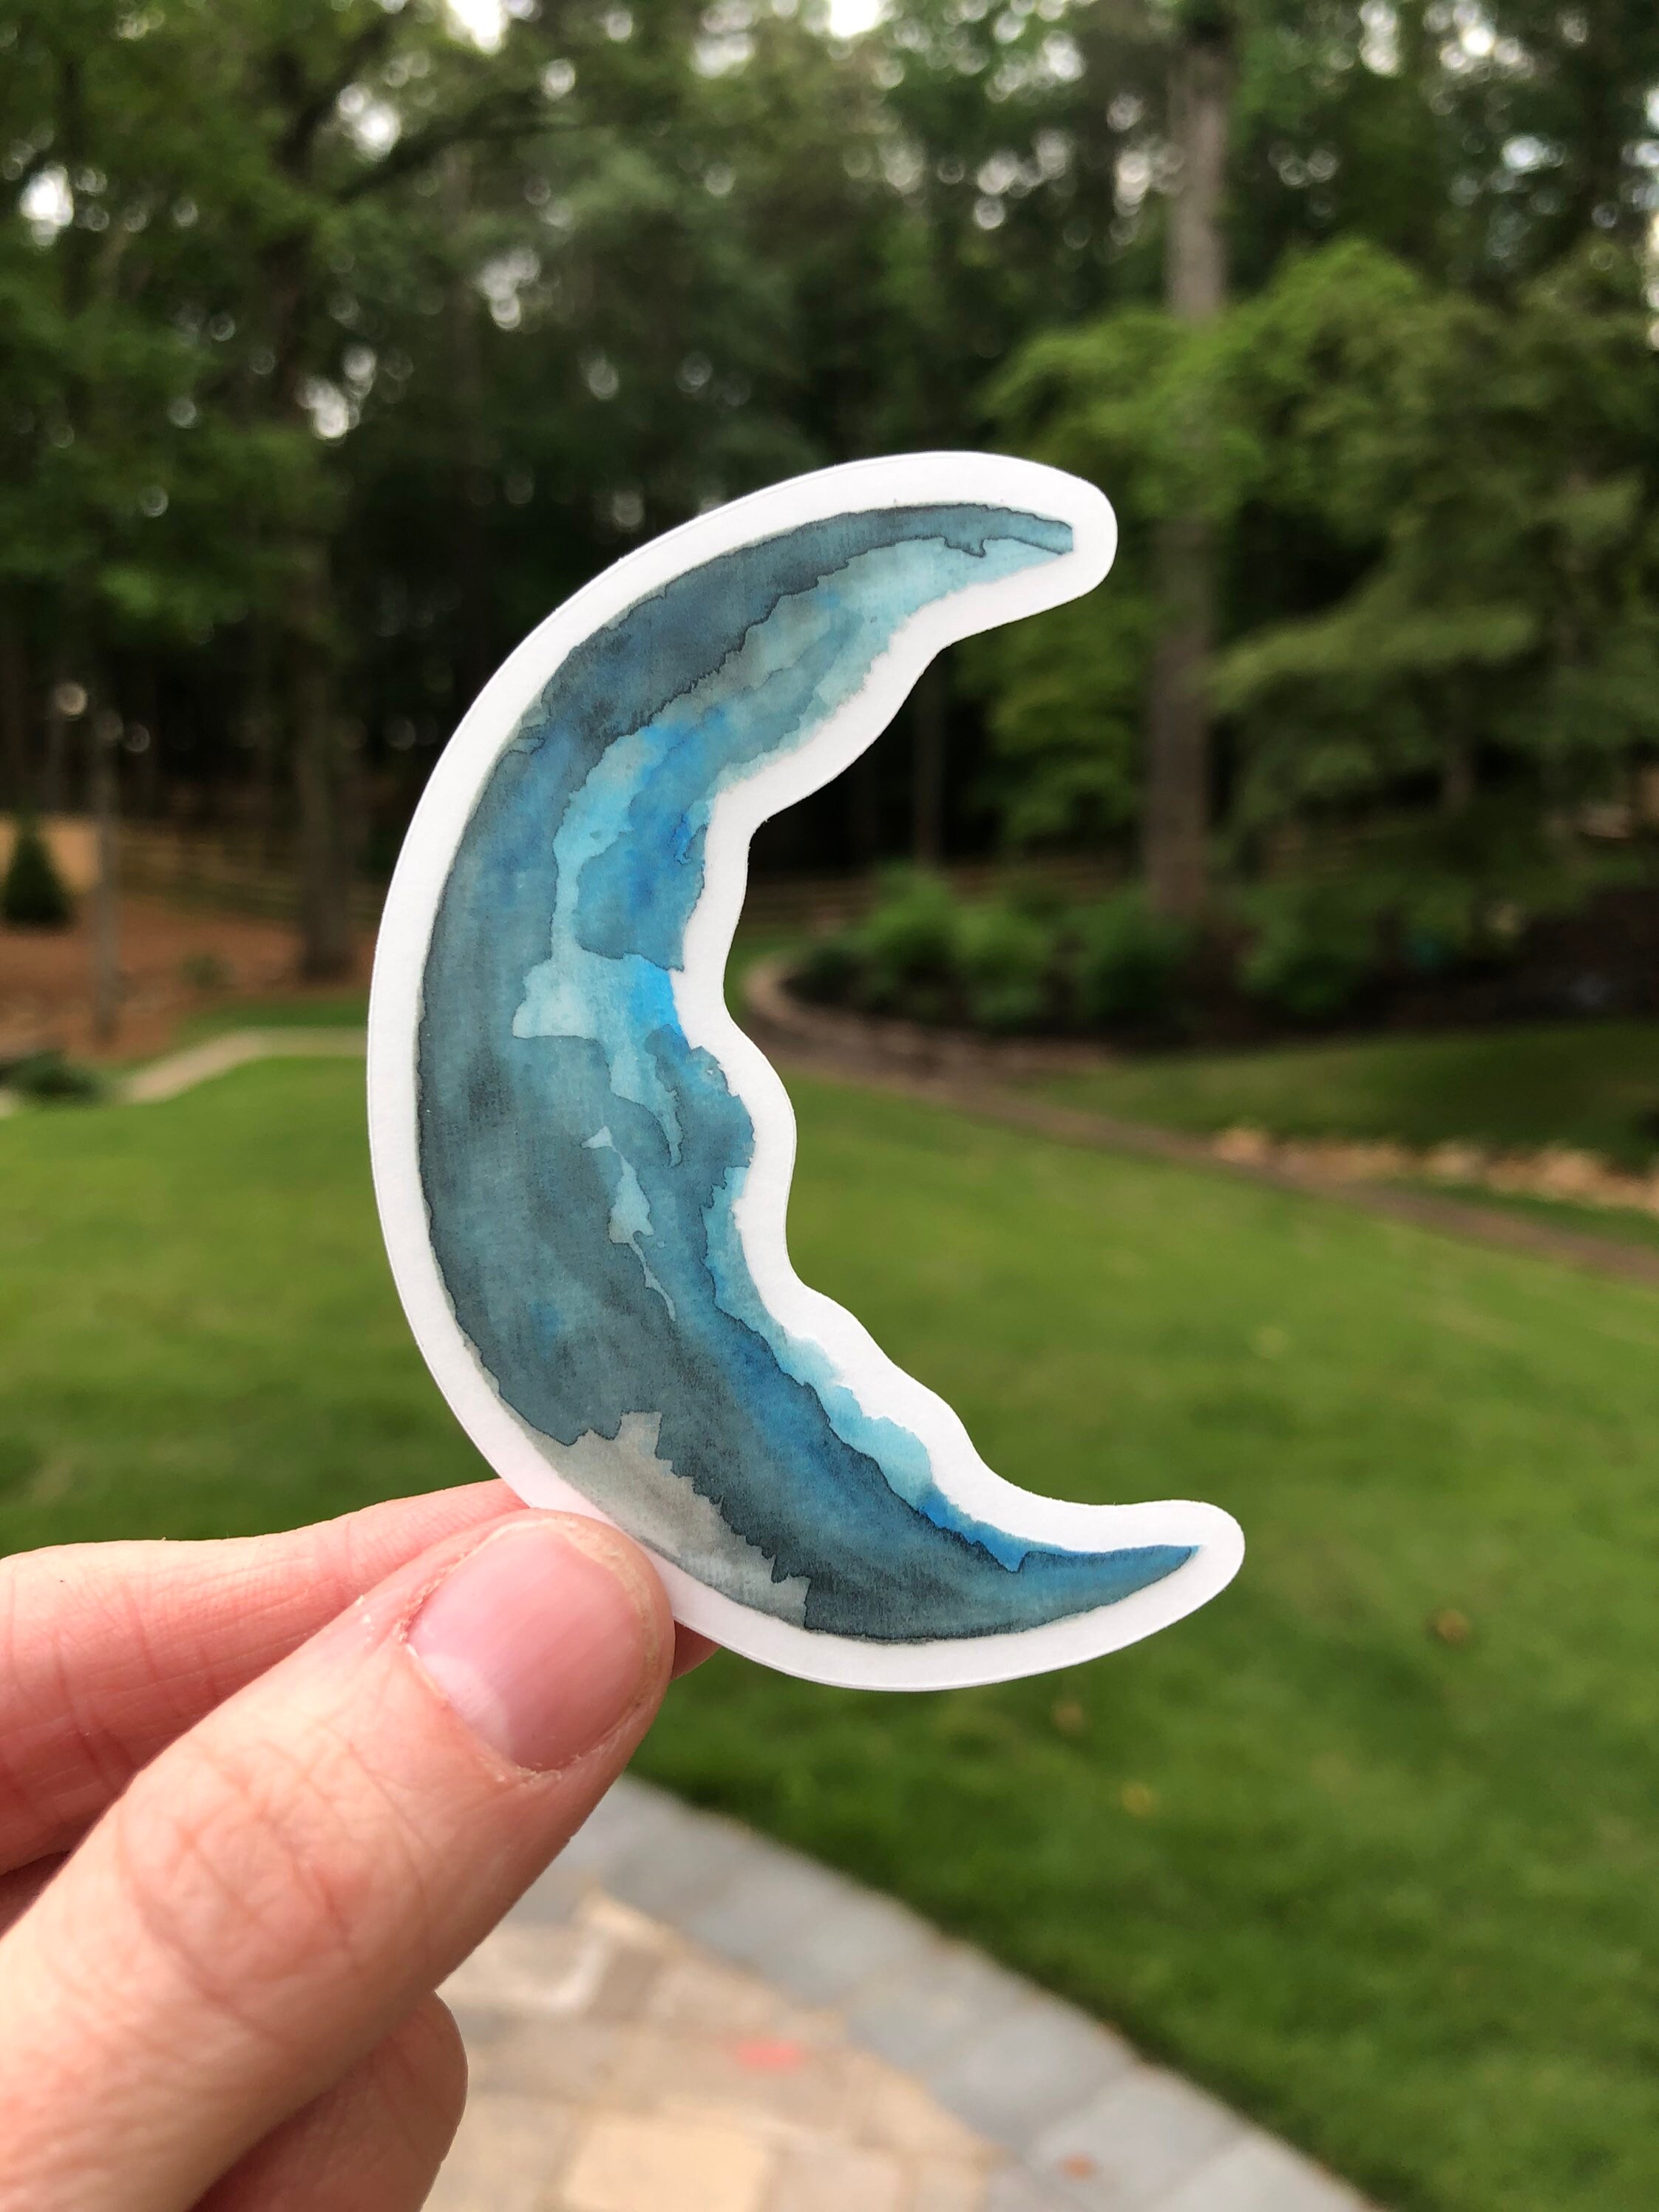 Blue Moon Watercolour Sticker for Sale by EmLosin